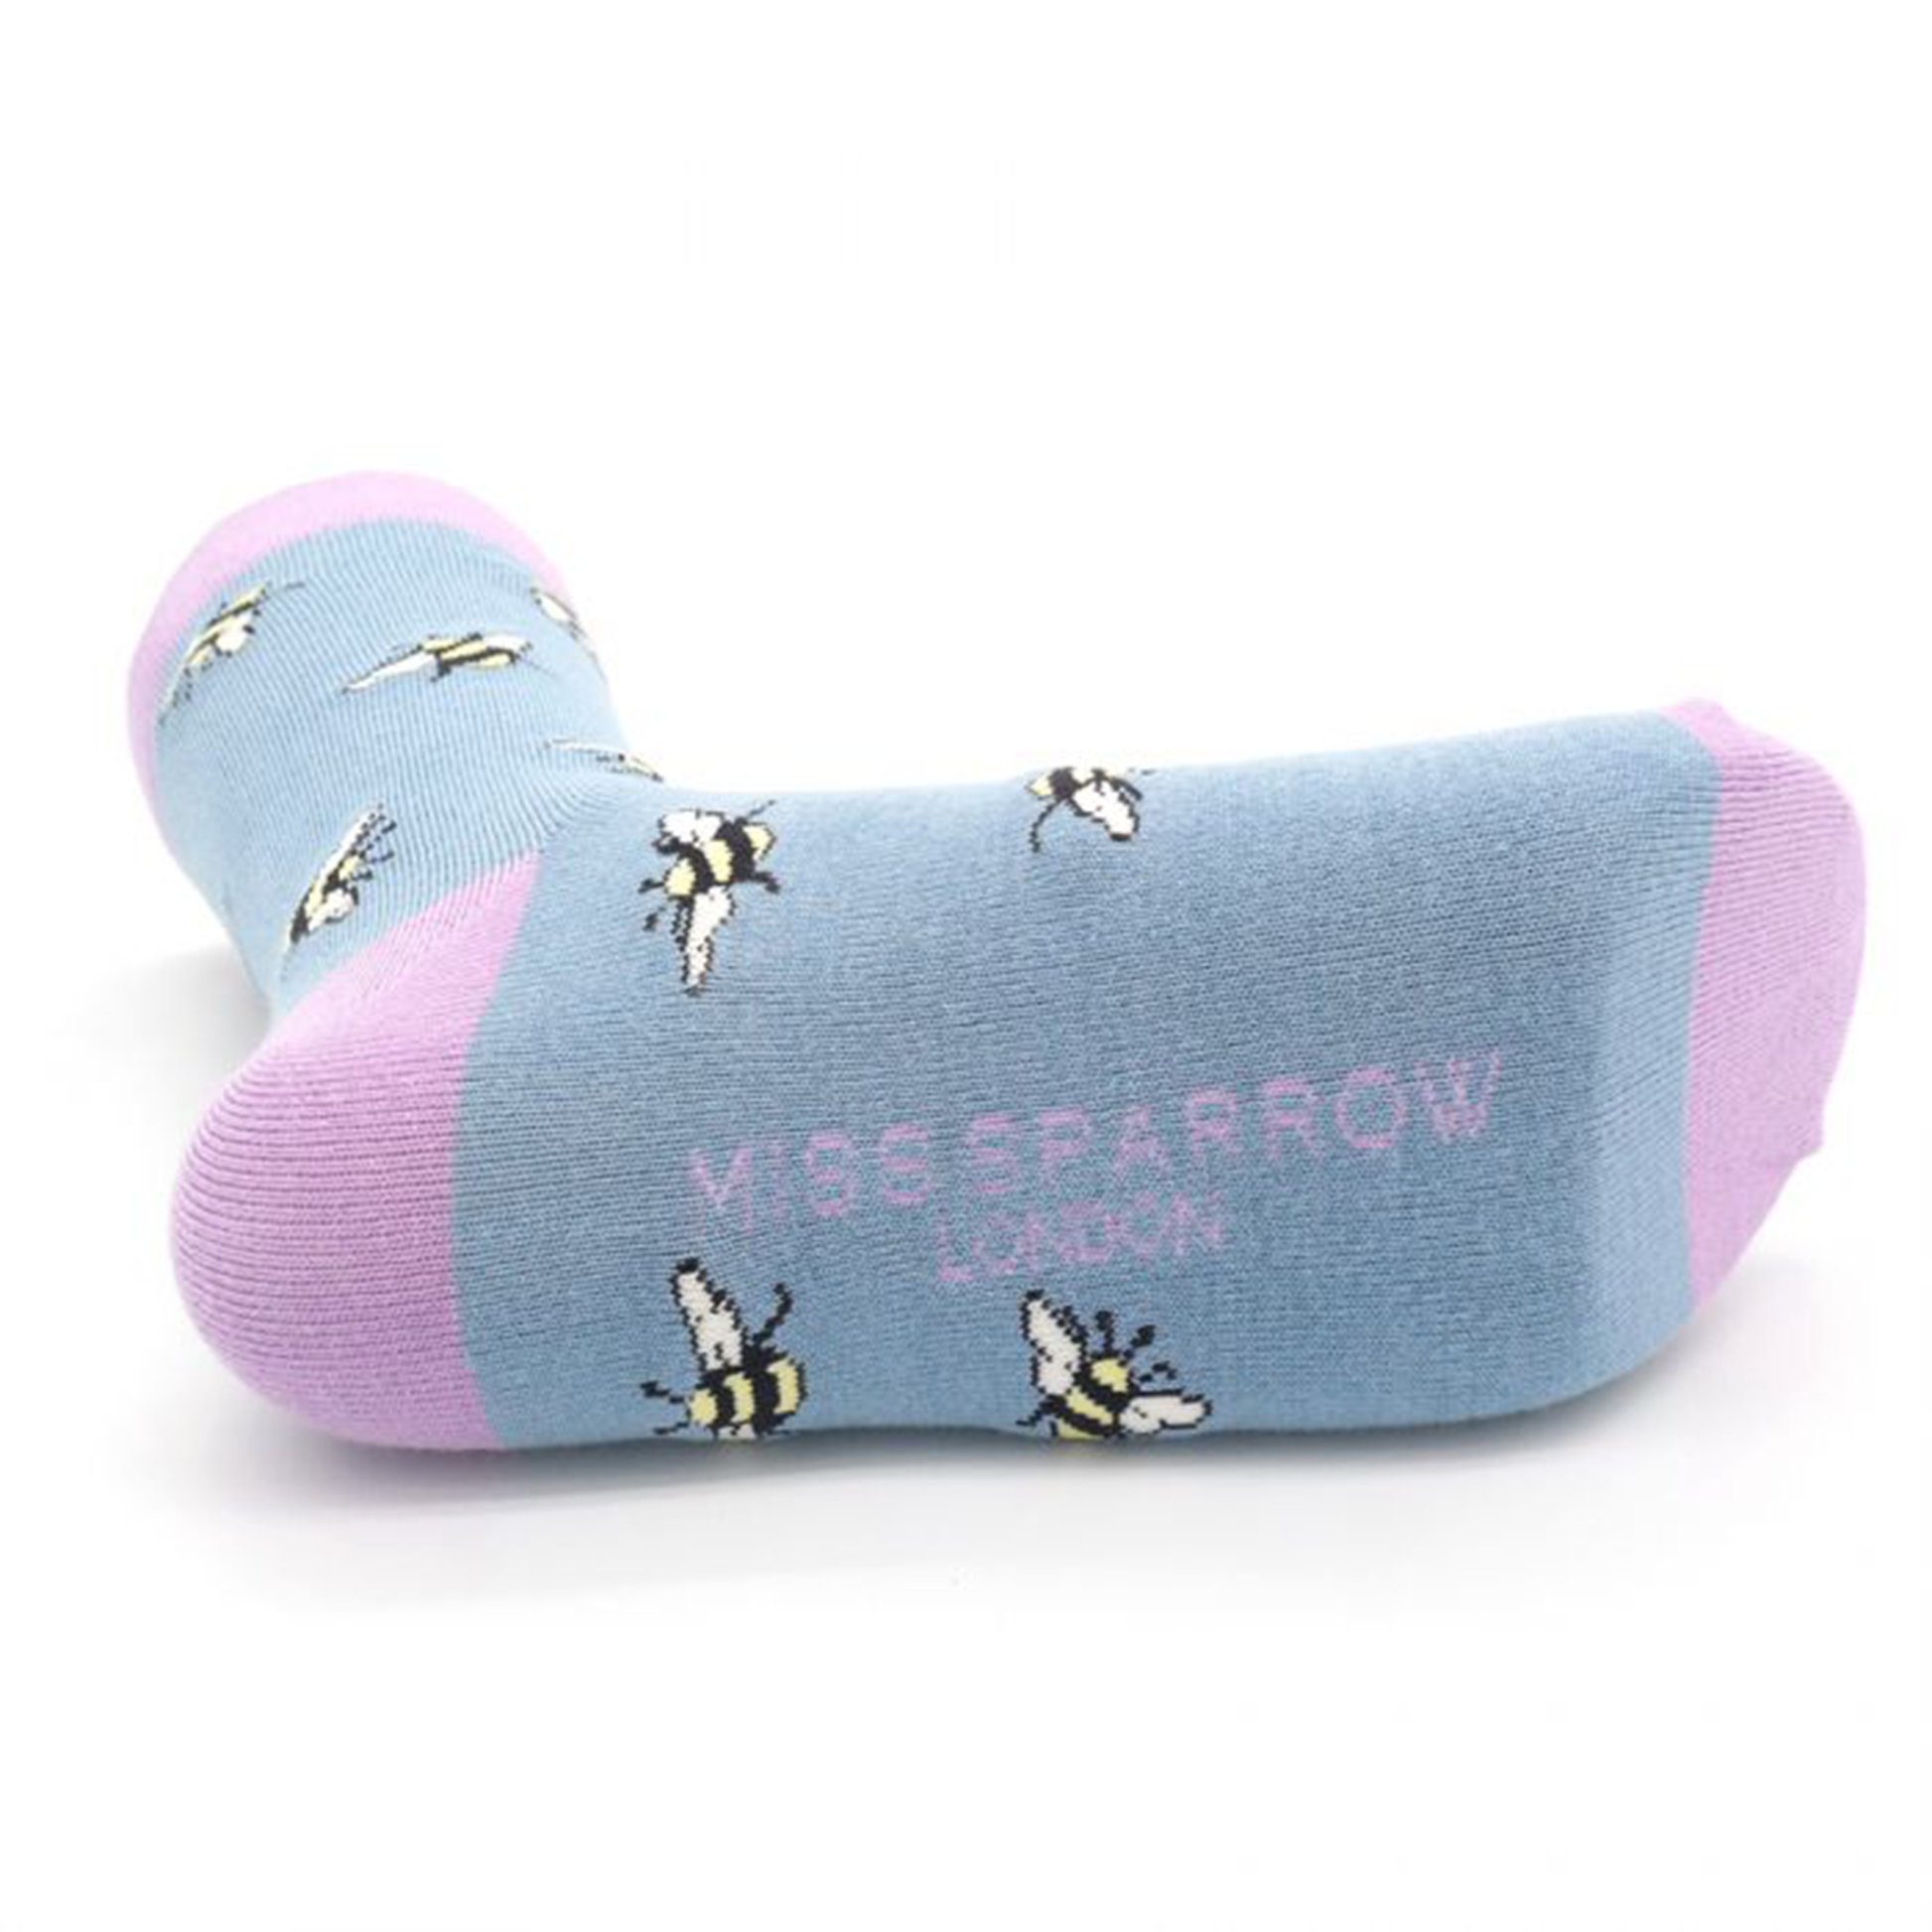 the bottom of the socks featuring the miss sparrow logo